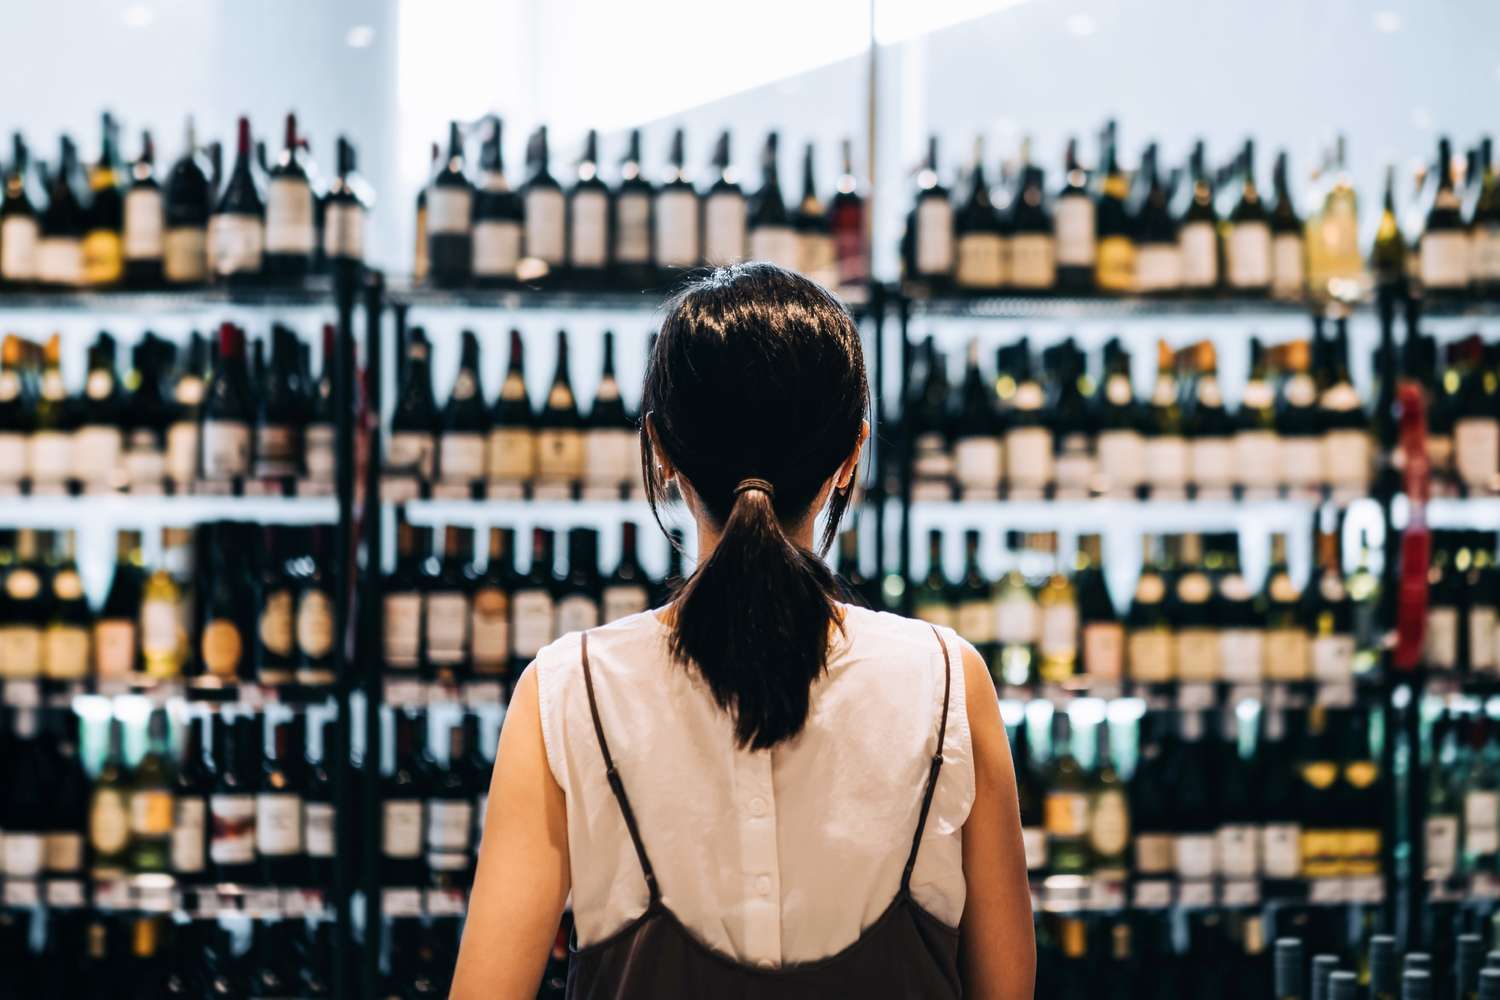 You Can Buy Better Wine if You Know What to Look for on the Bottle Label